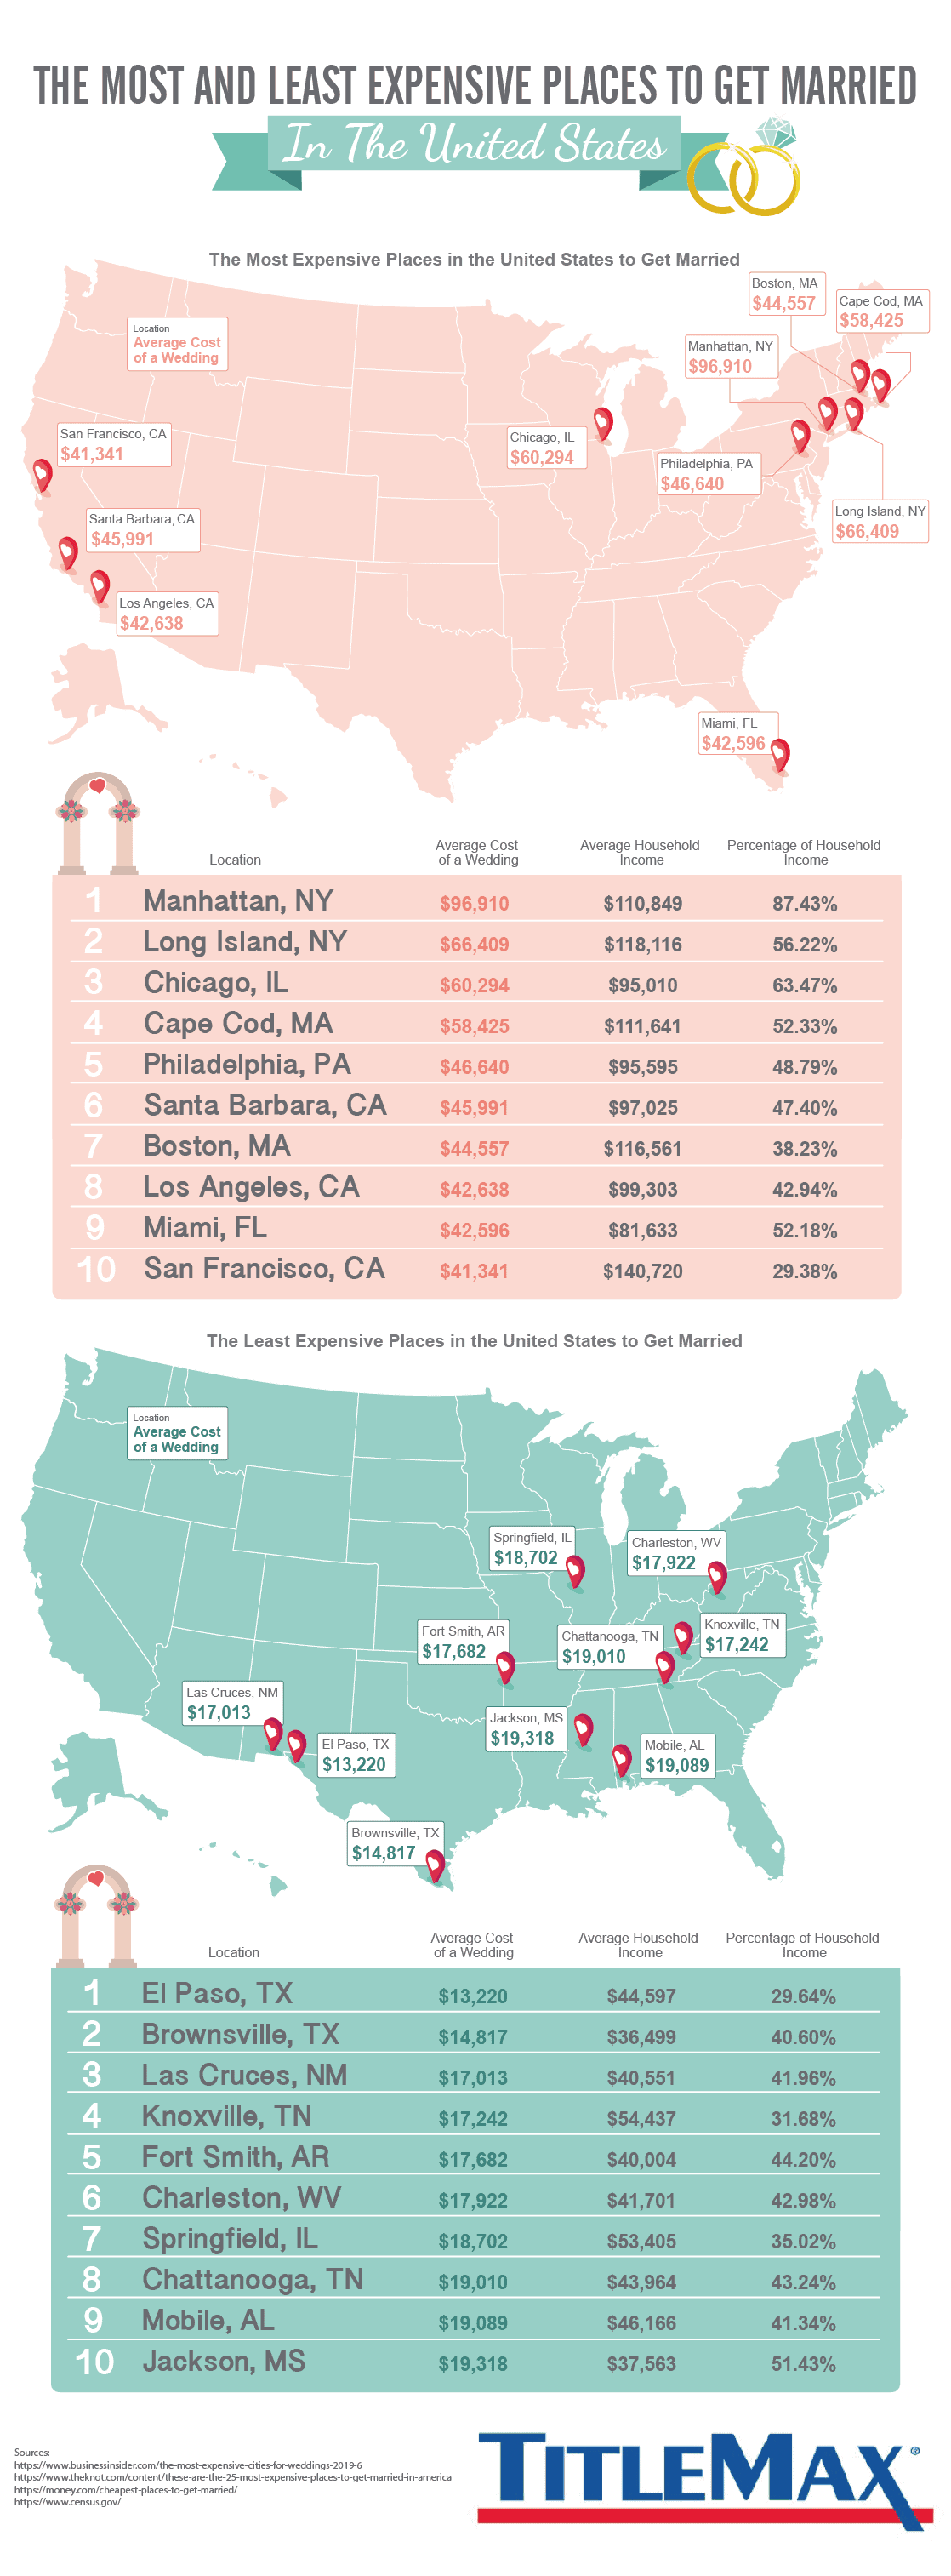 The Most and Least Expensive Places to Get Married in the United States